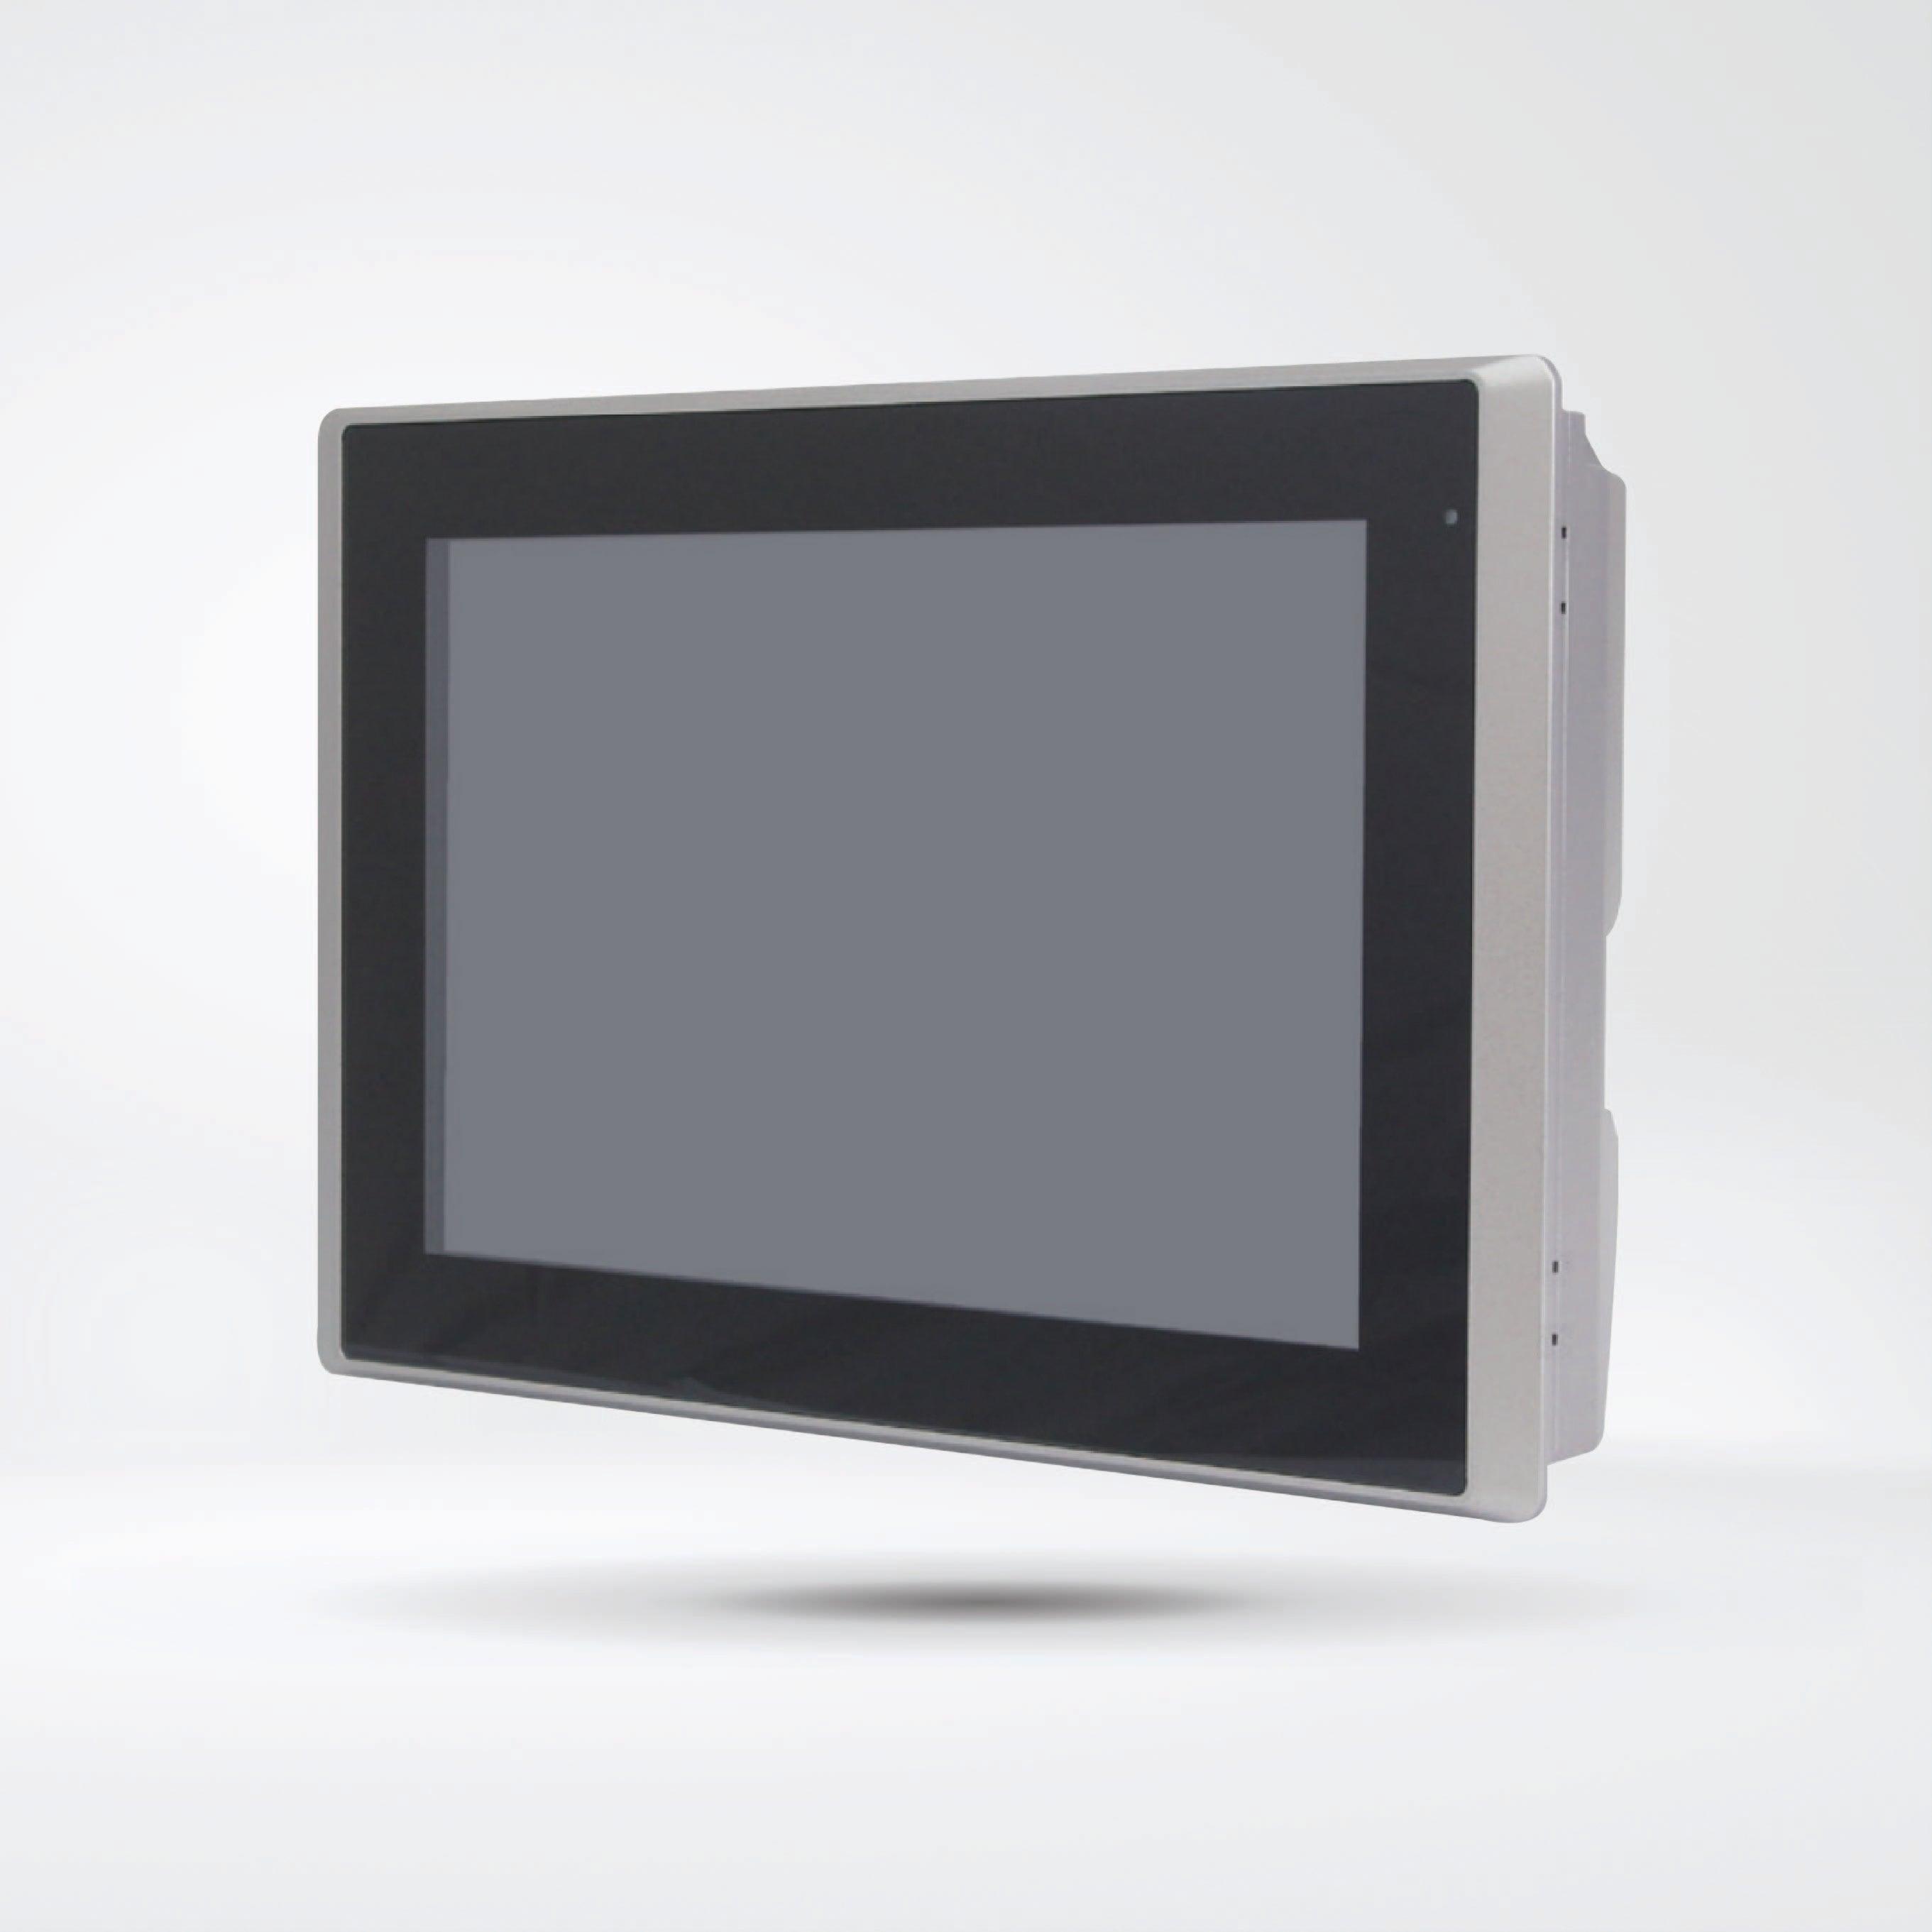 ARCHMI-810P New Generation Low Power Consumption HMI/Innovationg Fast, Bay Trail Solution - Riverplus